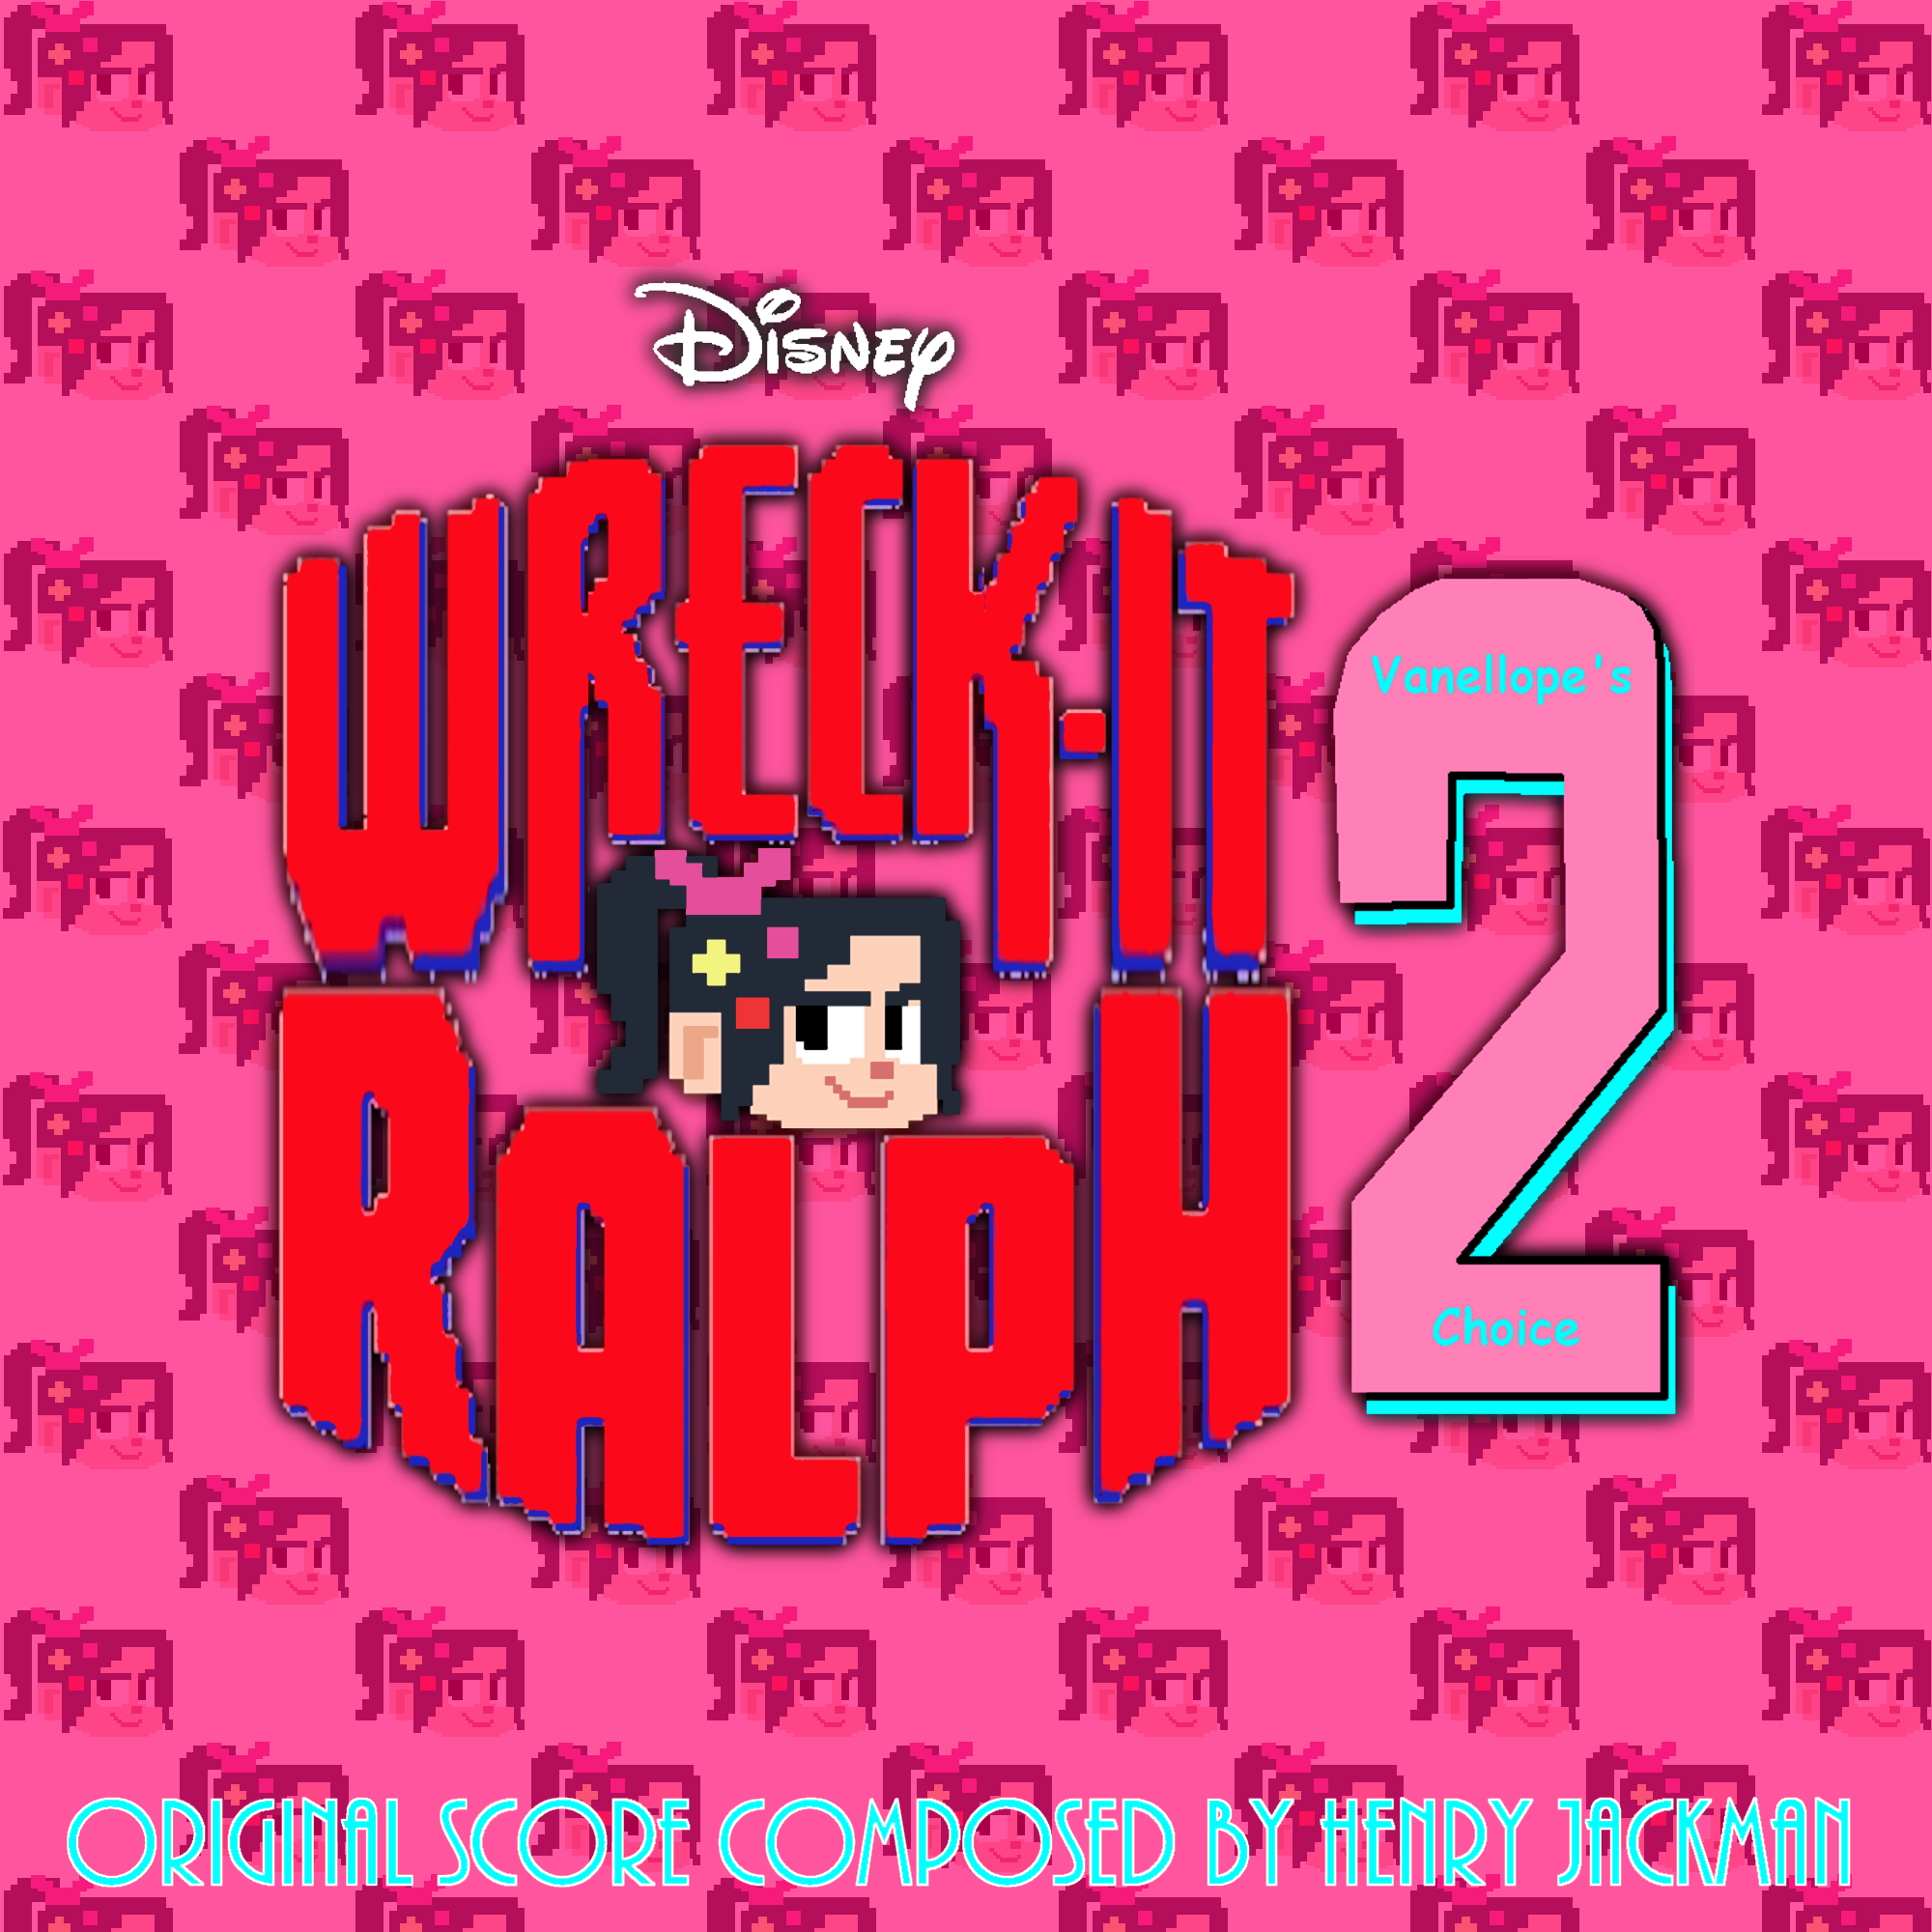 wreck it ralph soundtrack free mp3 download